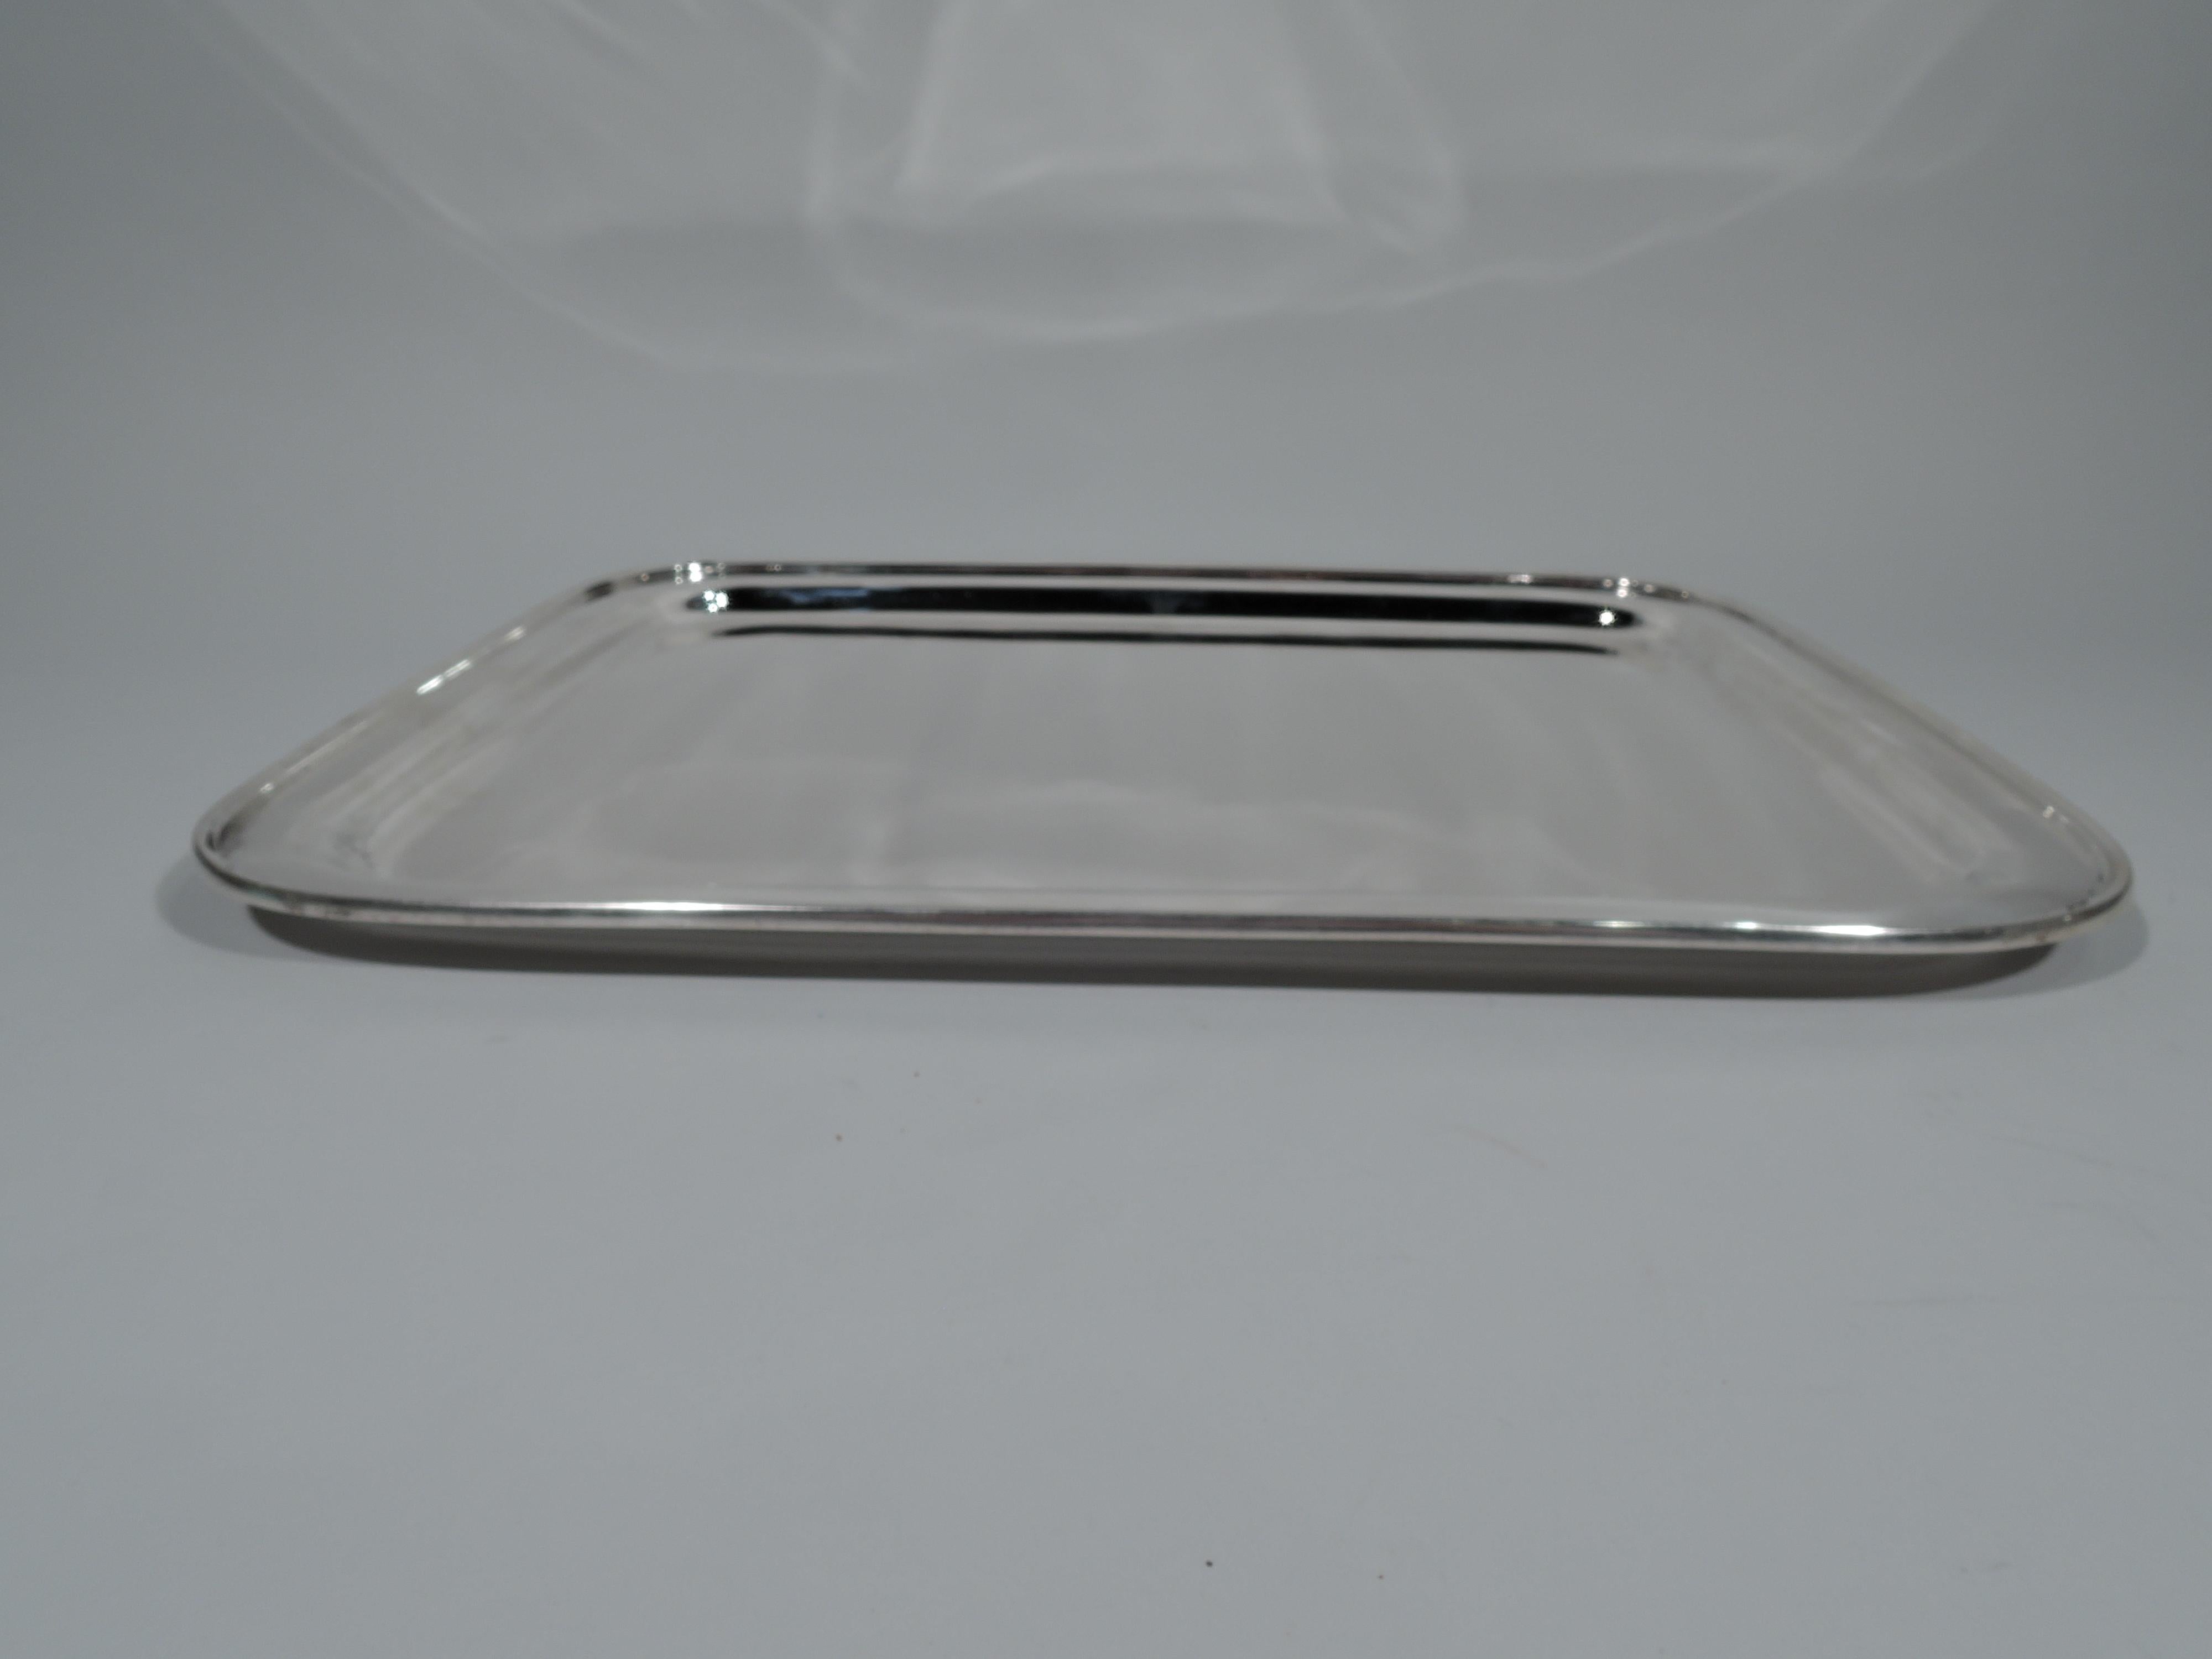 Art Deco sterling silver serving tray. Made by Tiffany & Co. in New York, circa 1937. Rectangular with curved corners and molded rim. Hallmark includes pattern no. 22552 (first produced in 1937). Weight: 61.5 troy ounces.